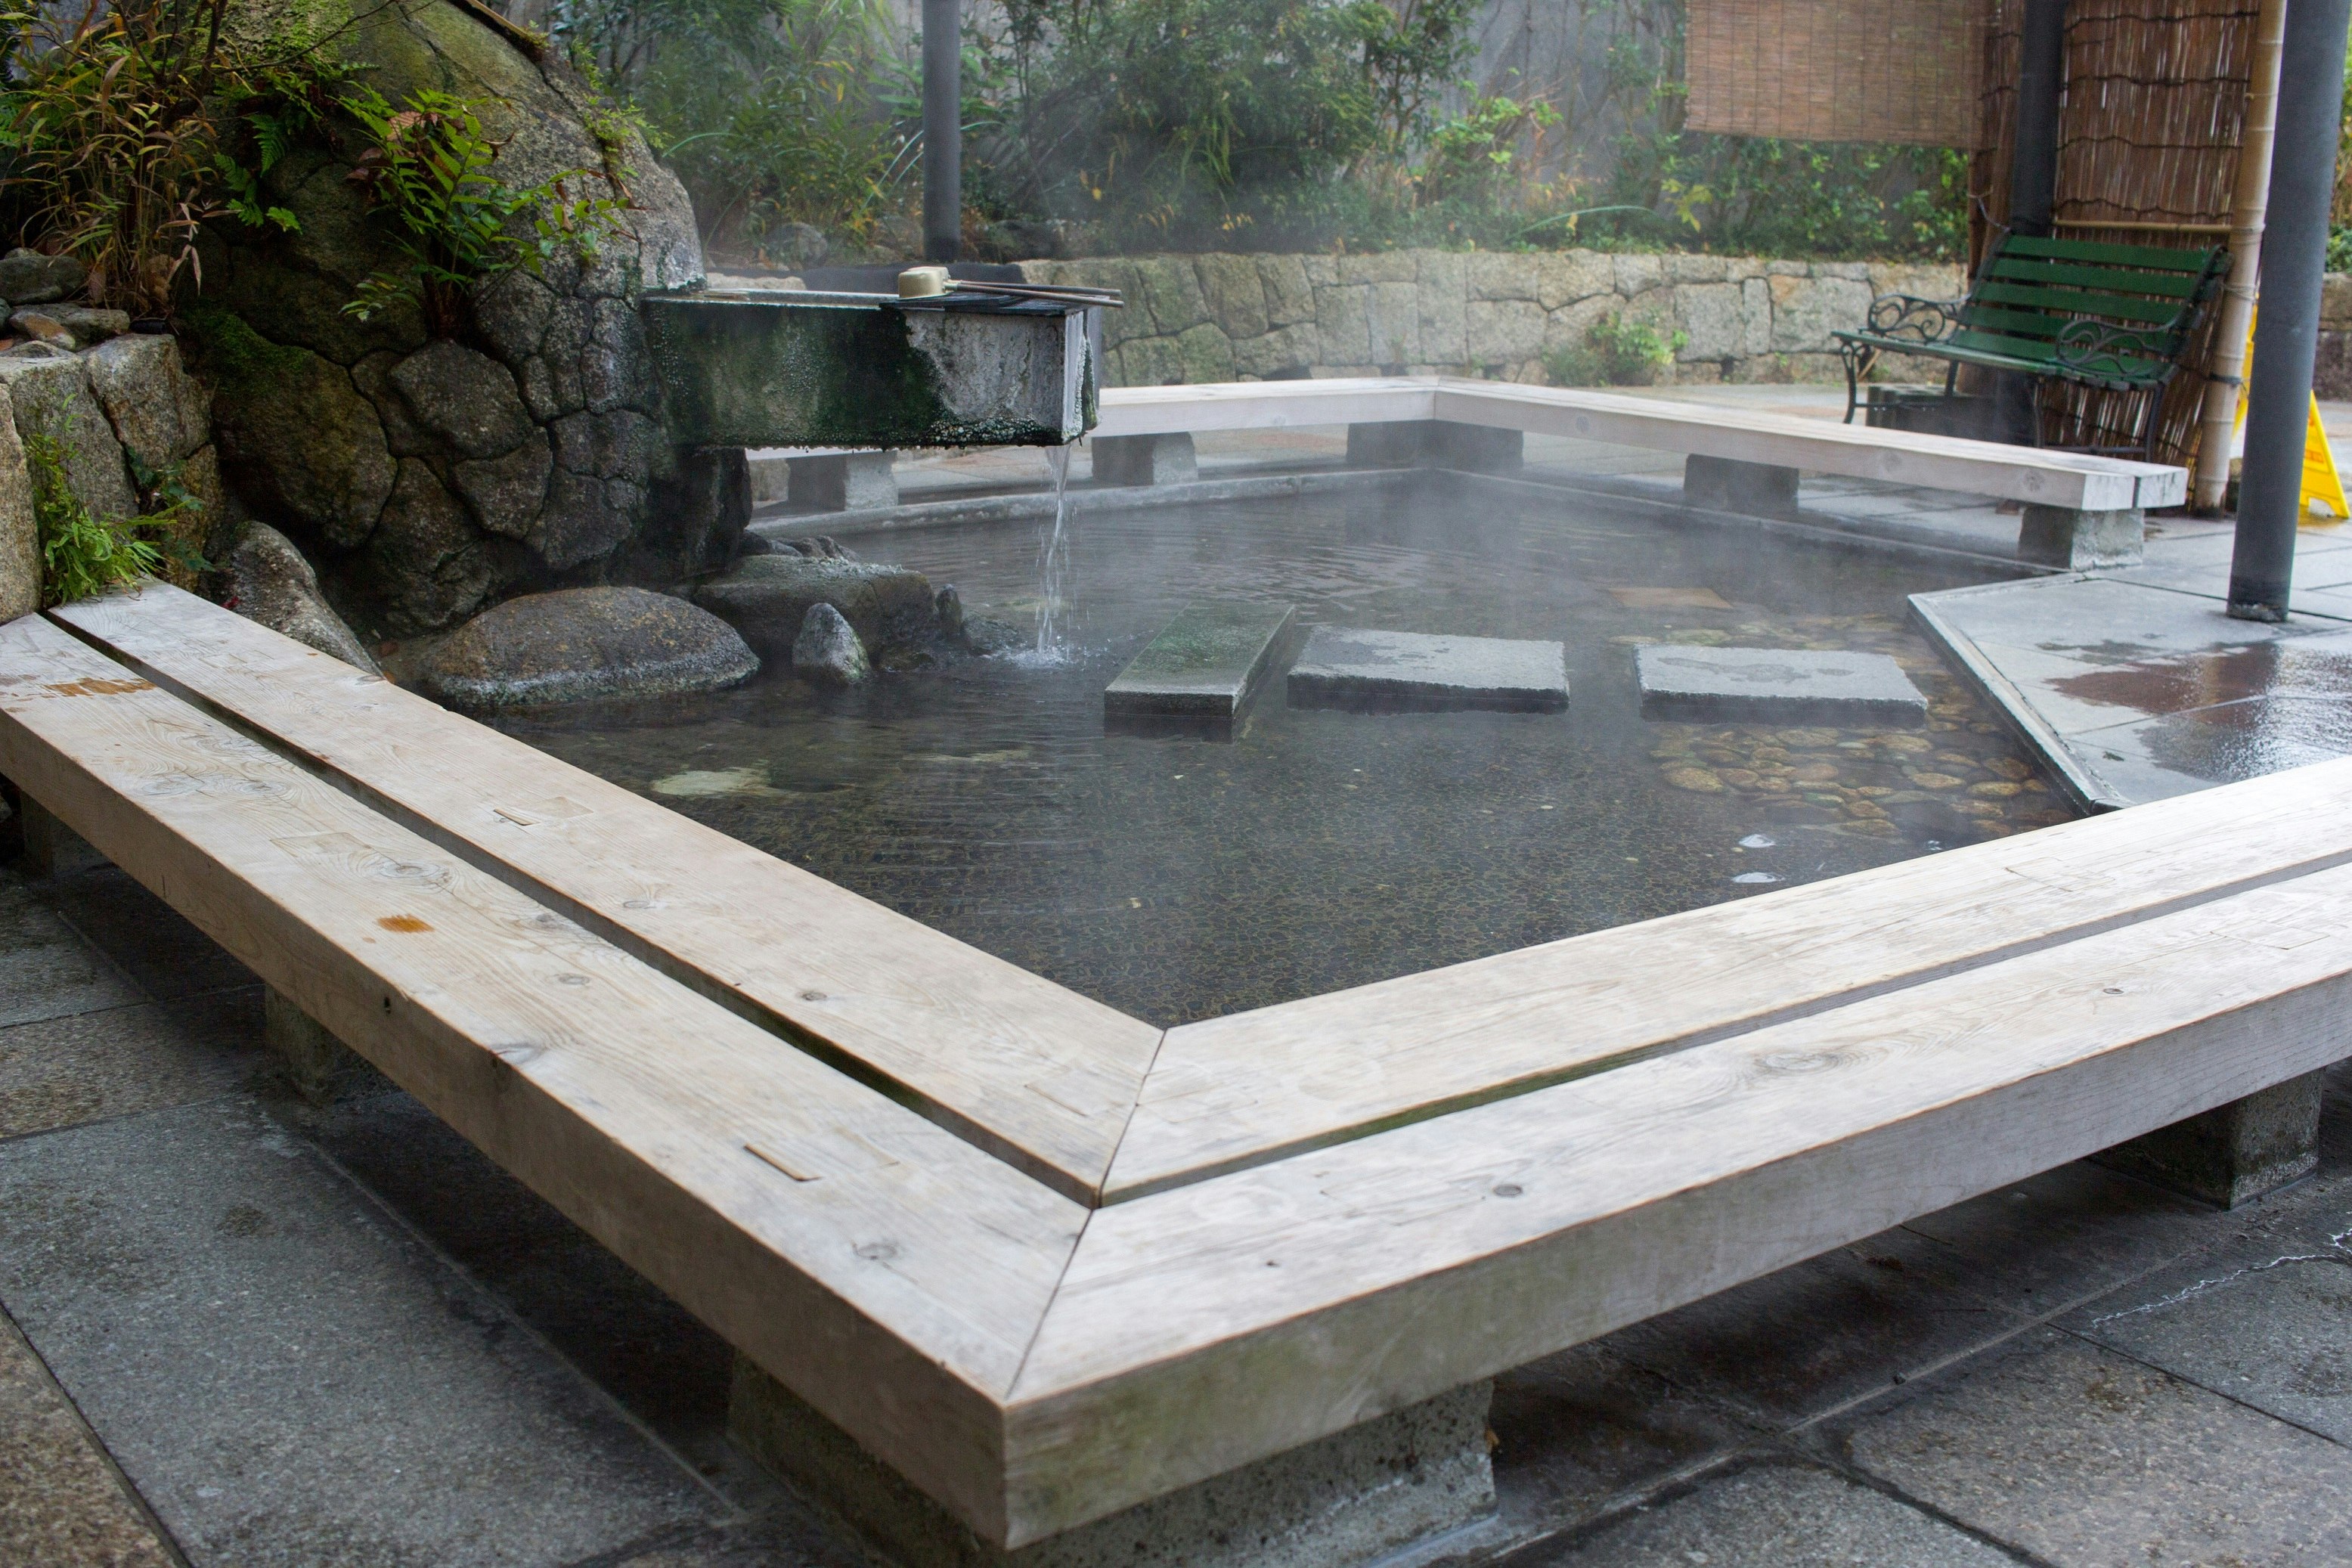 An onsen in Kaga. The hot pool is a hexagonal shape, with benches surrounding it on all sides. The water trickles in from a pipe above the pool.